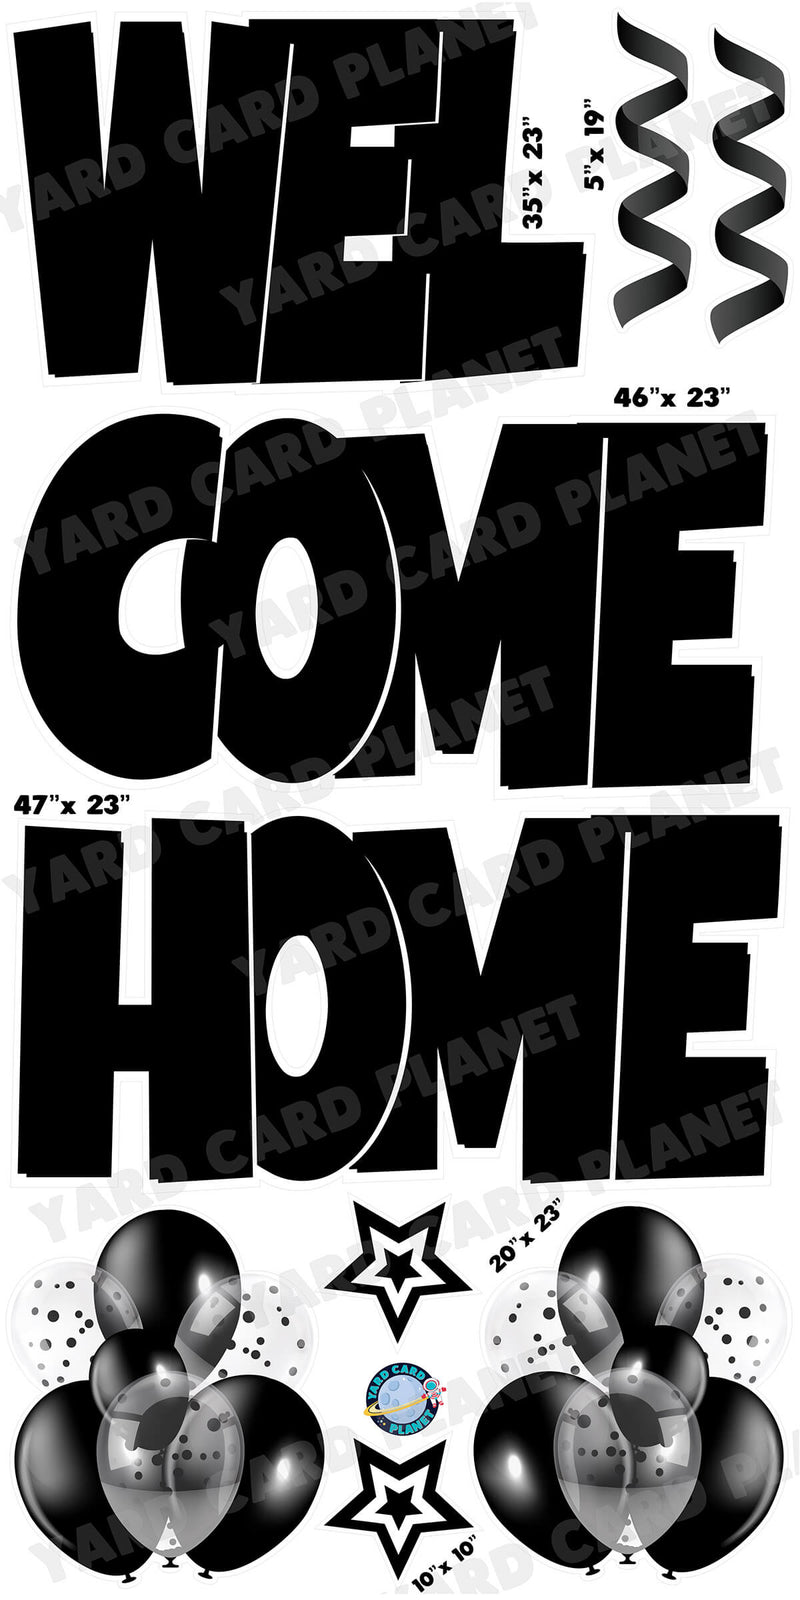 Large 23" Welcome Home Yard Card EZ Quick Sets in Luckiest Guy Font and Flair in Black Solid Color